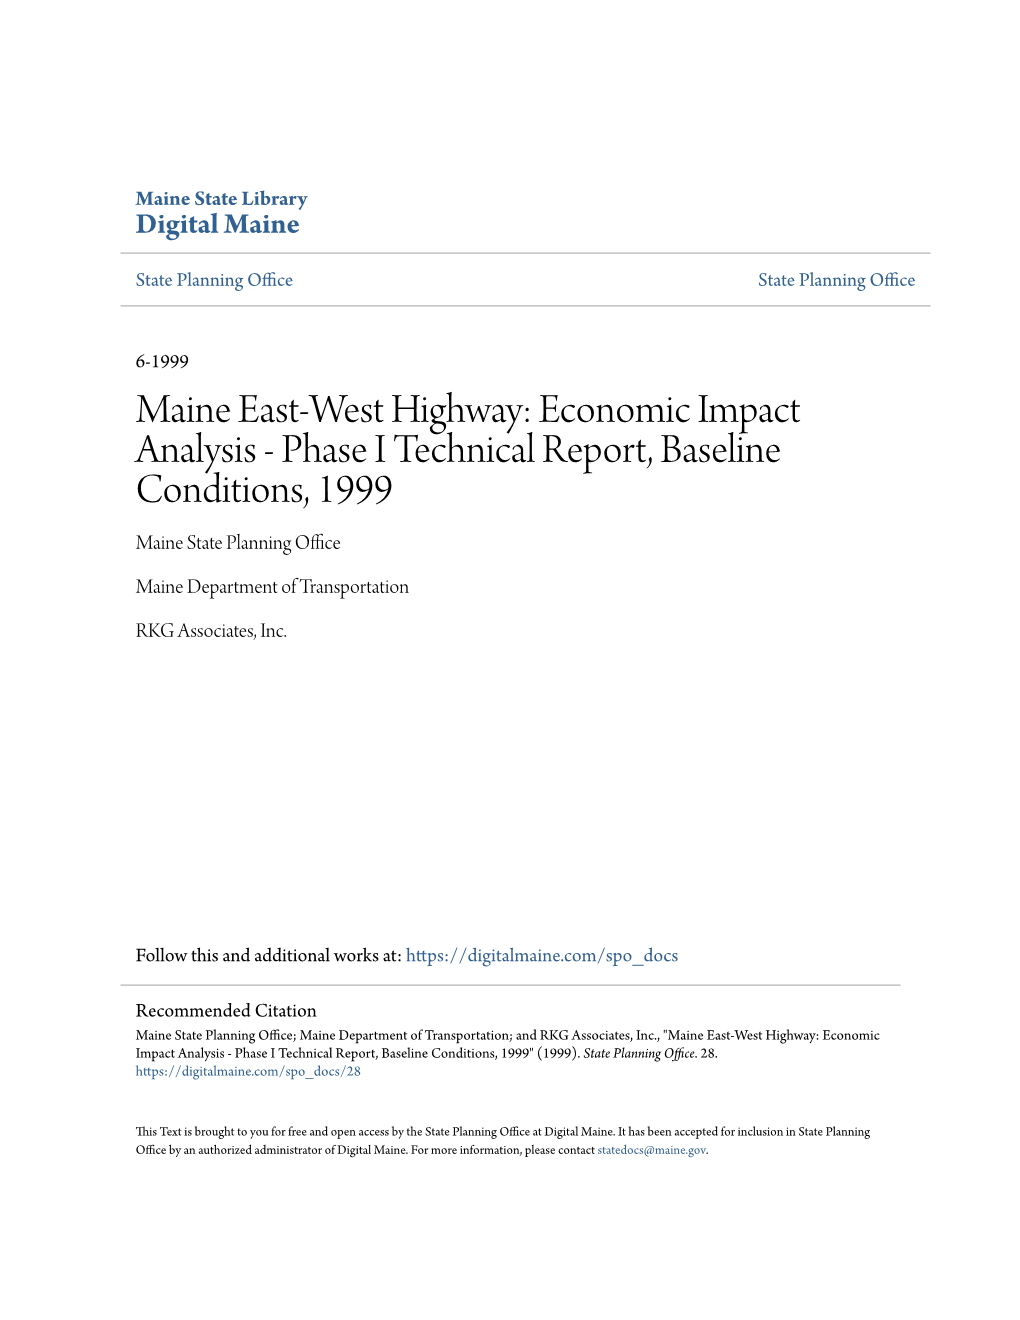 Maine East-West Highway: Economic Impact Analysis - Phase I Technical Report, Baseline Conditions, 1999 Maine State Planning Office